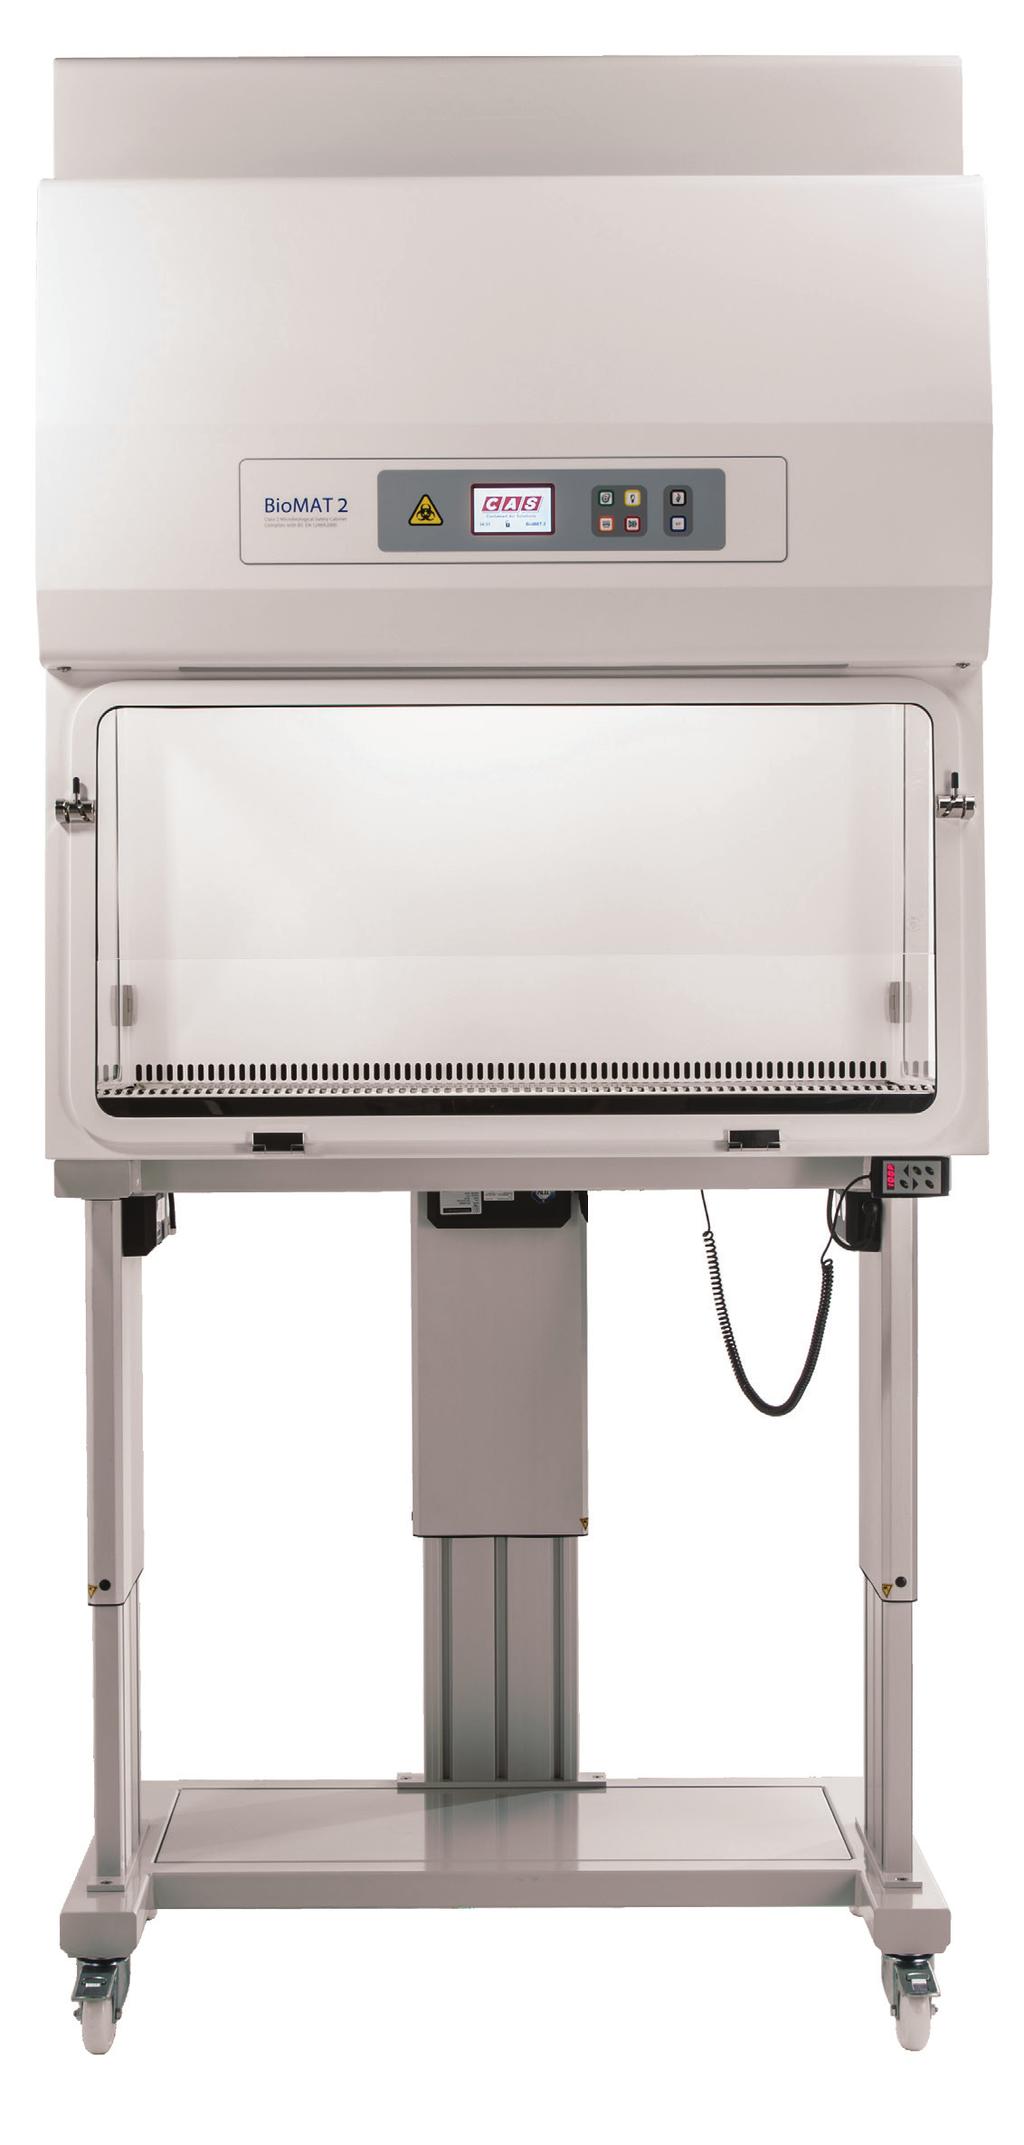 Features The BioMAT 2 range of Class 2 Microbiological Safety Cabinets provide a flexible design platform allowing users to select a cabinet to meet their exact laboratory requirement.